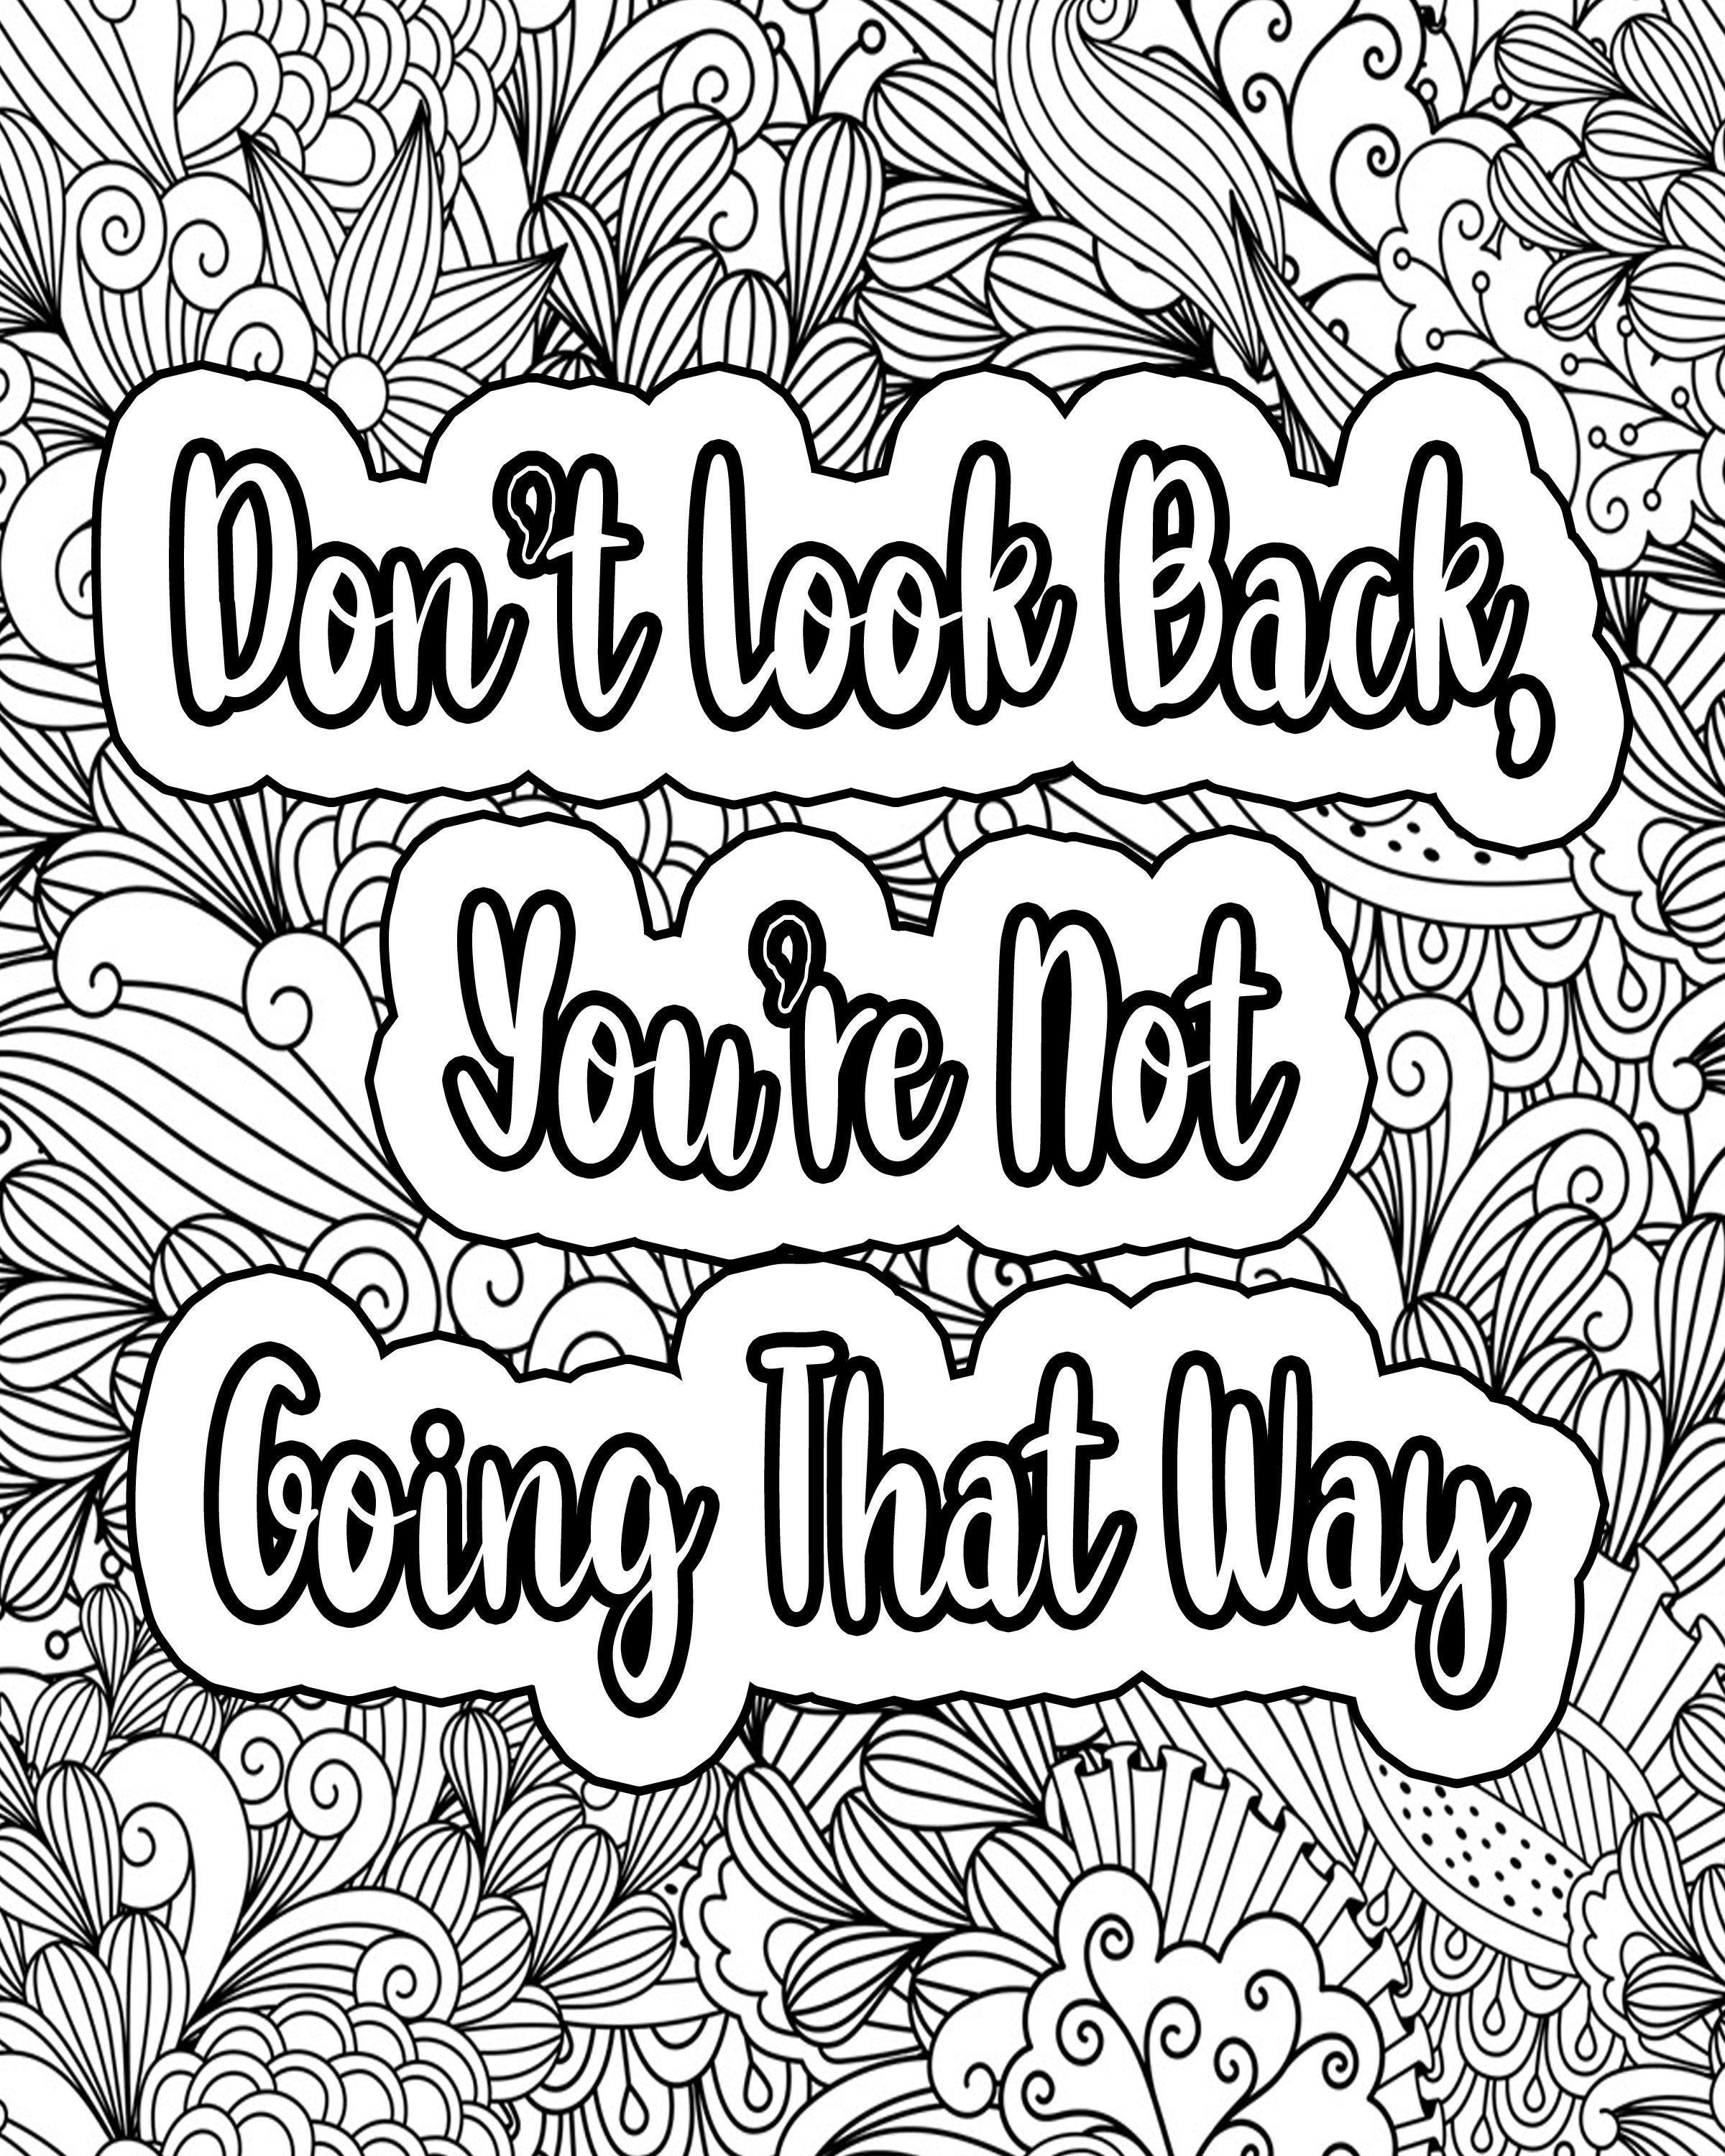 8400-collection-coloring-pages-quotes-for-adults-to-print-hd-coloring